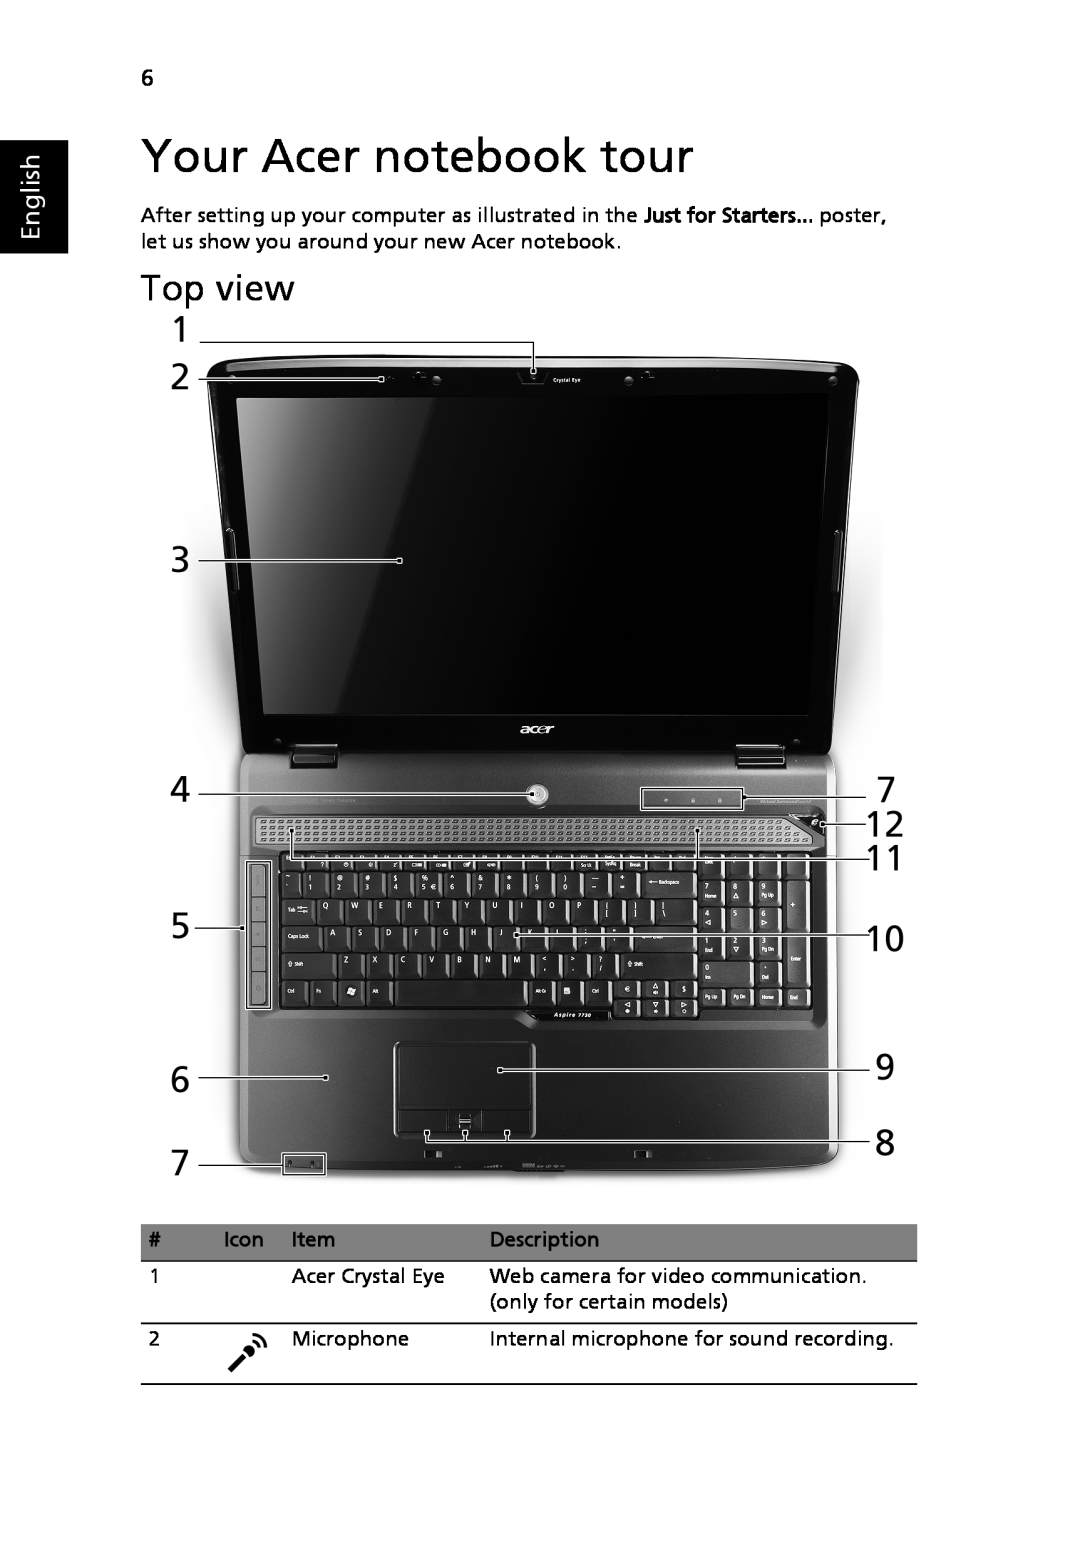 Acer 7730 Series manual Your Acer notebook tour, Top view, English, Icon Item, Description 